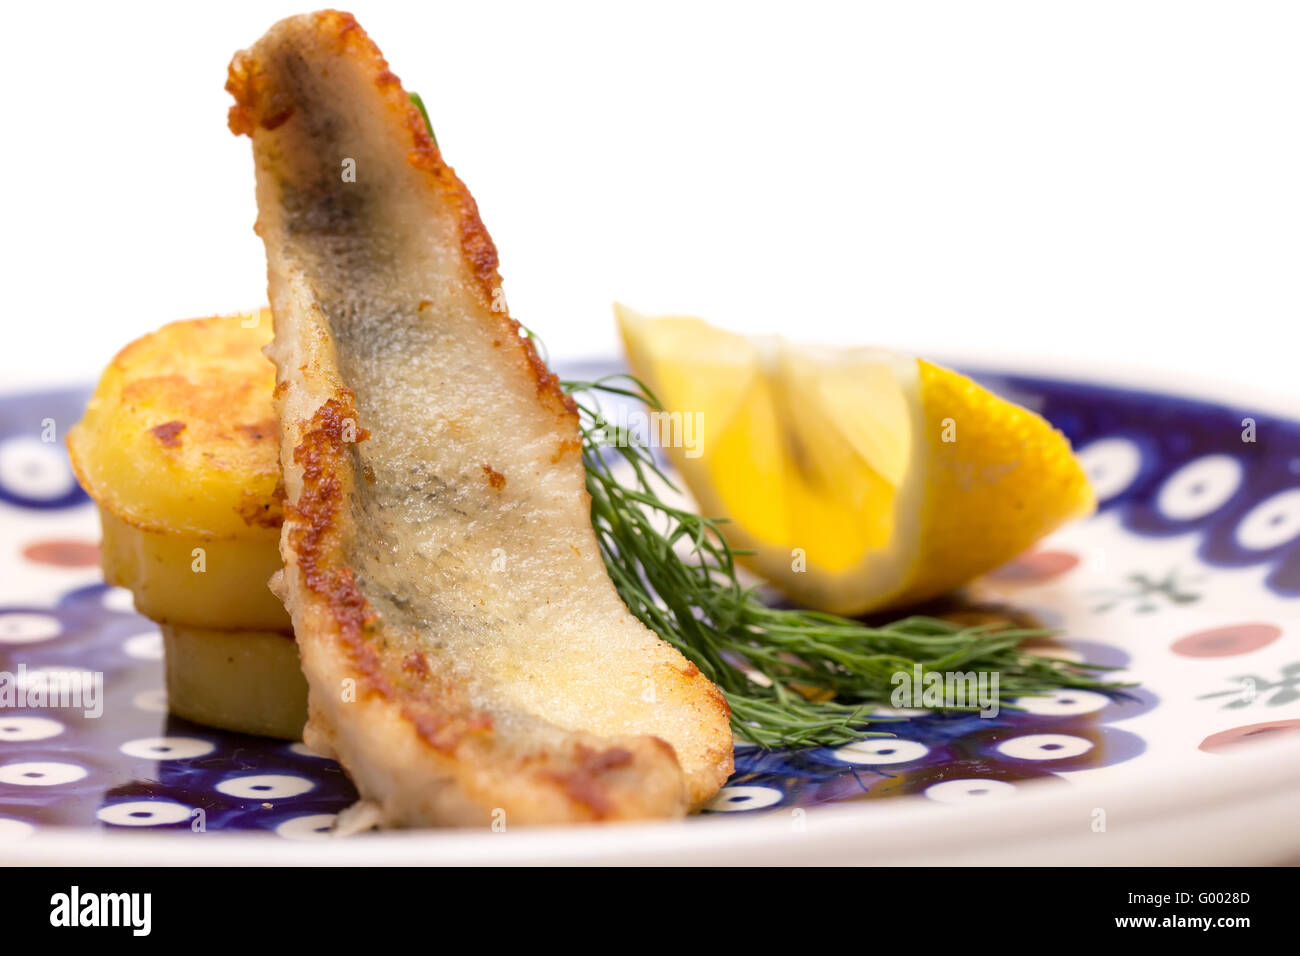 Perch filet with fried potatoes Stock Photo